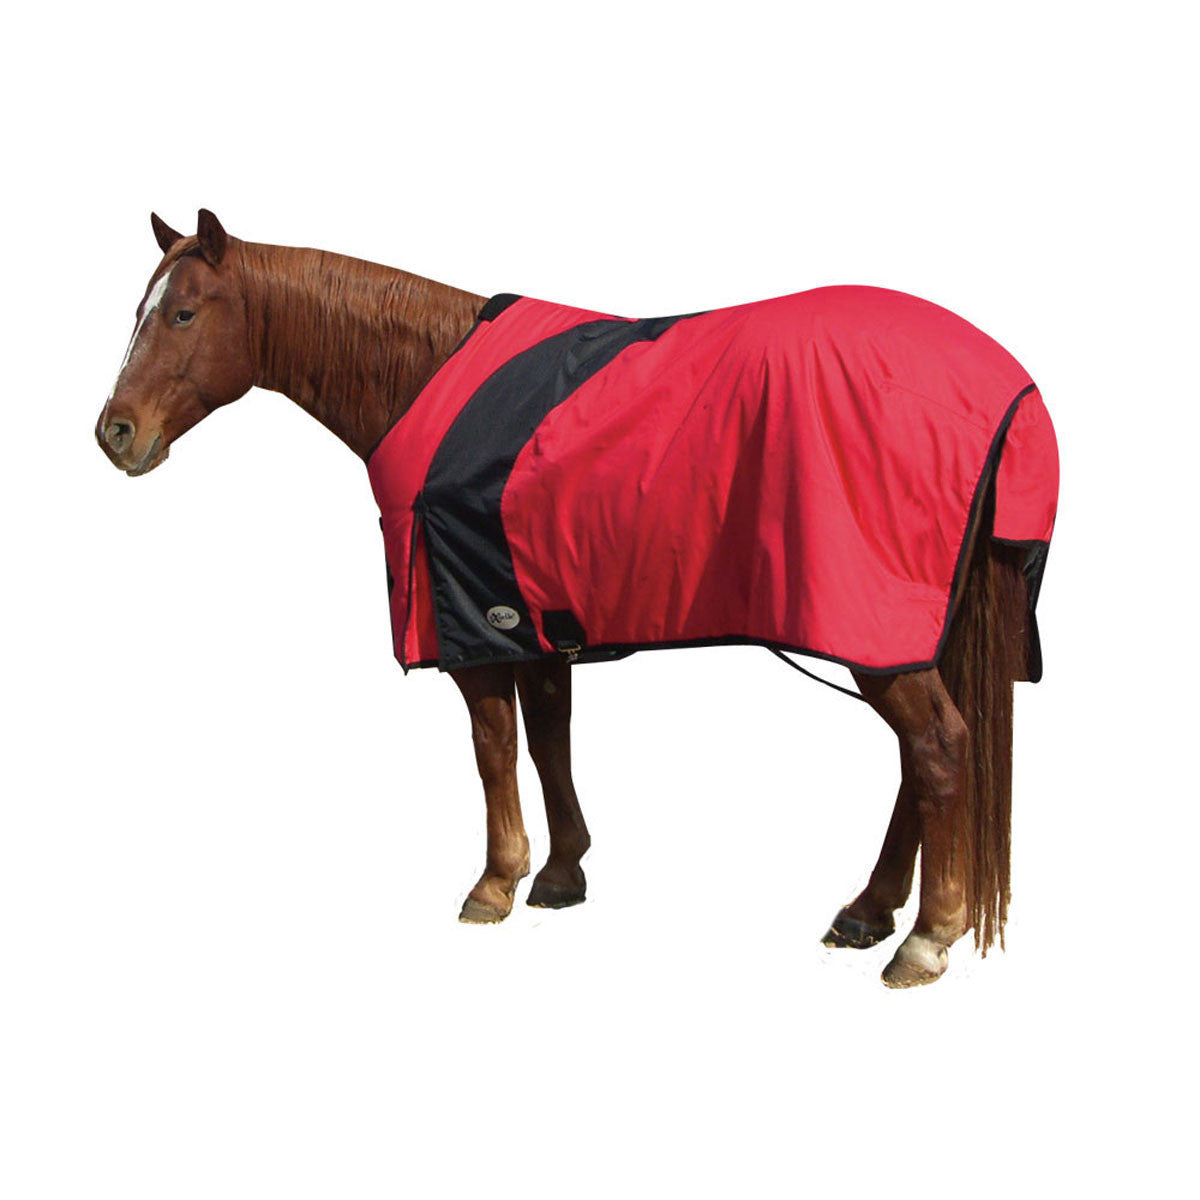 EXSELLE PRIMA HORSE BLANKET-RED WITH BLACK 68-83 FOB